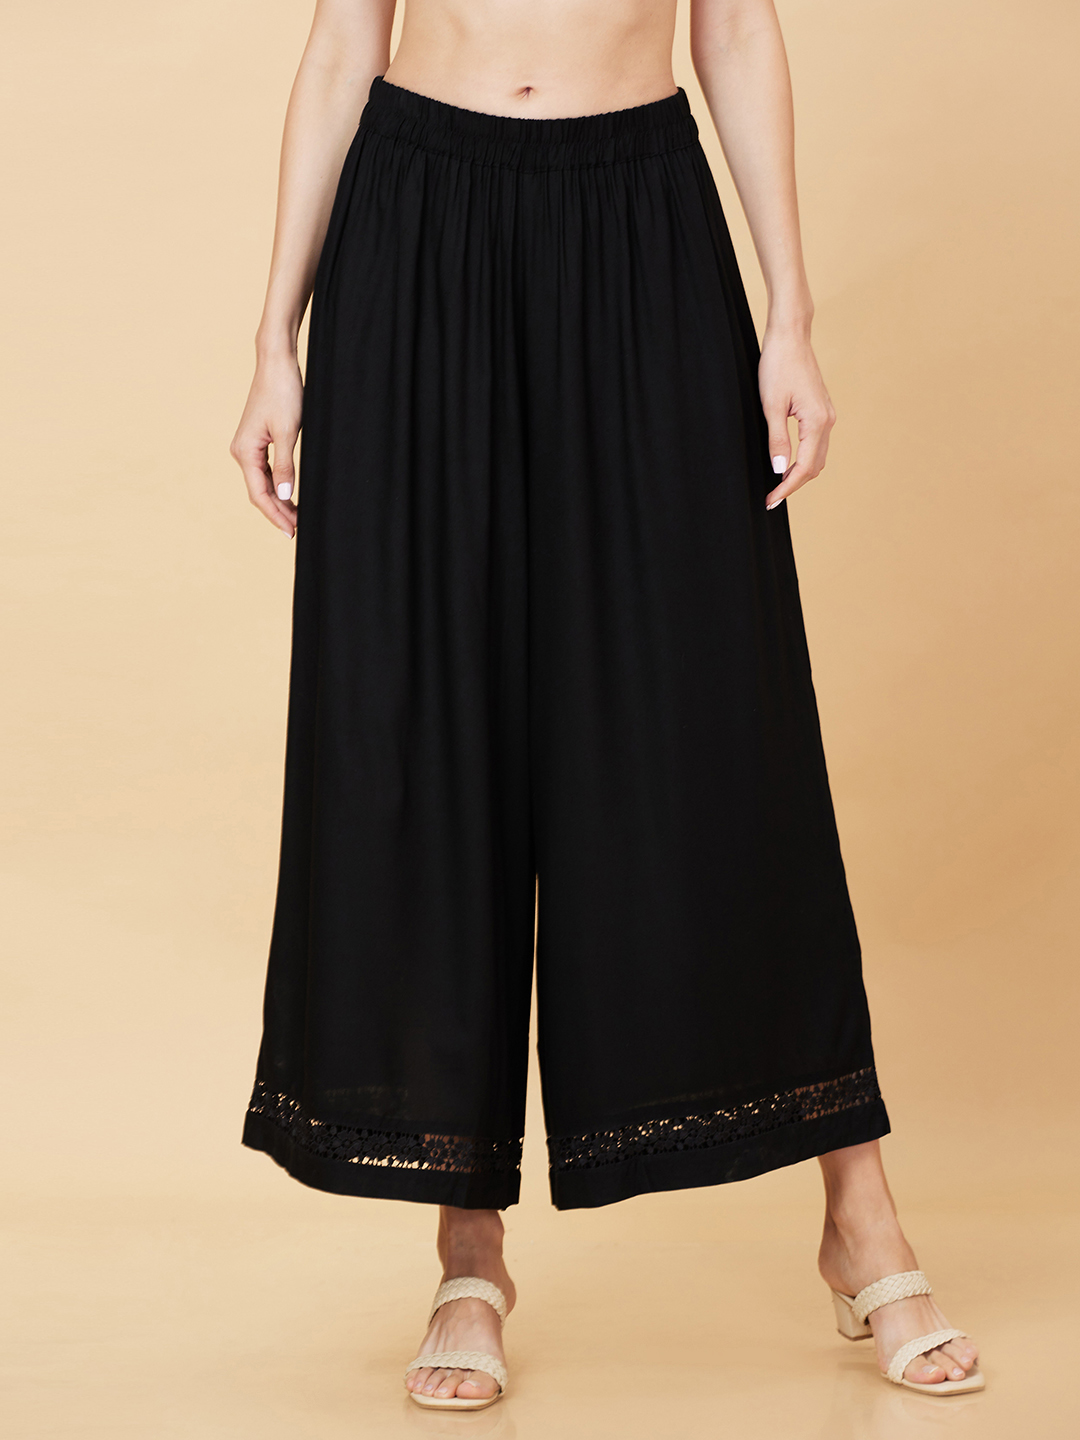 Globus Women Black Solid Ethnic Wide Leg Palazzo with Lace at Hem